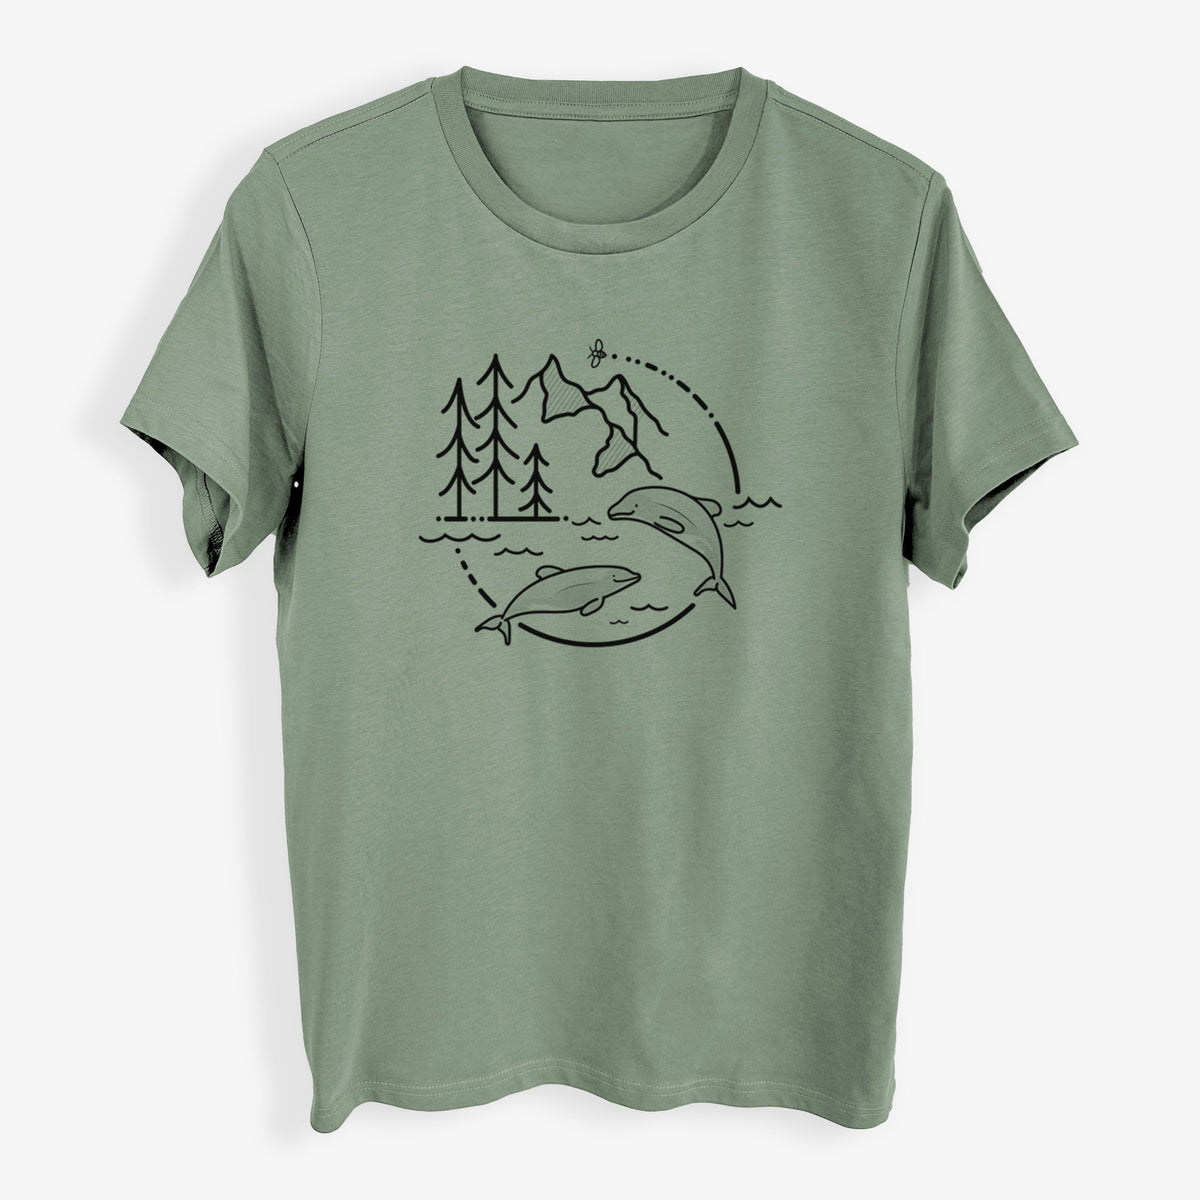 It&#39;s All Connected - Maui Dolphins - Womens Everyday Maple Tee